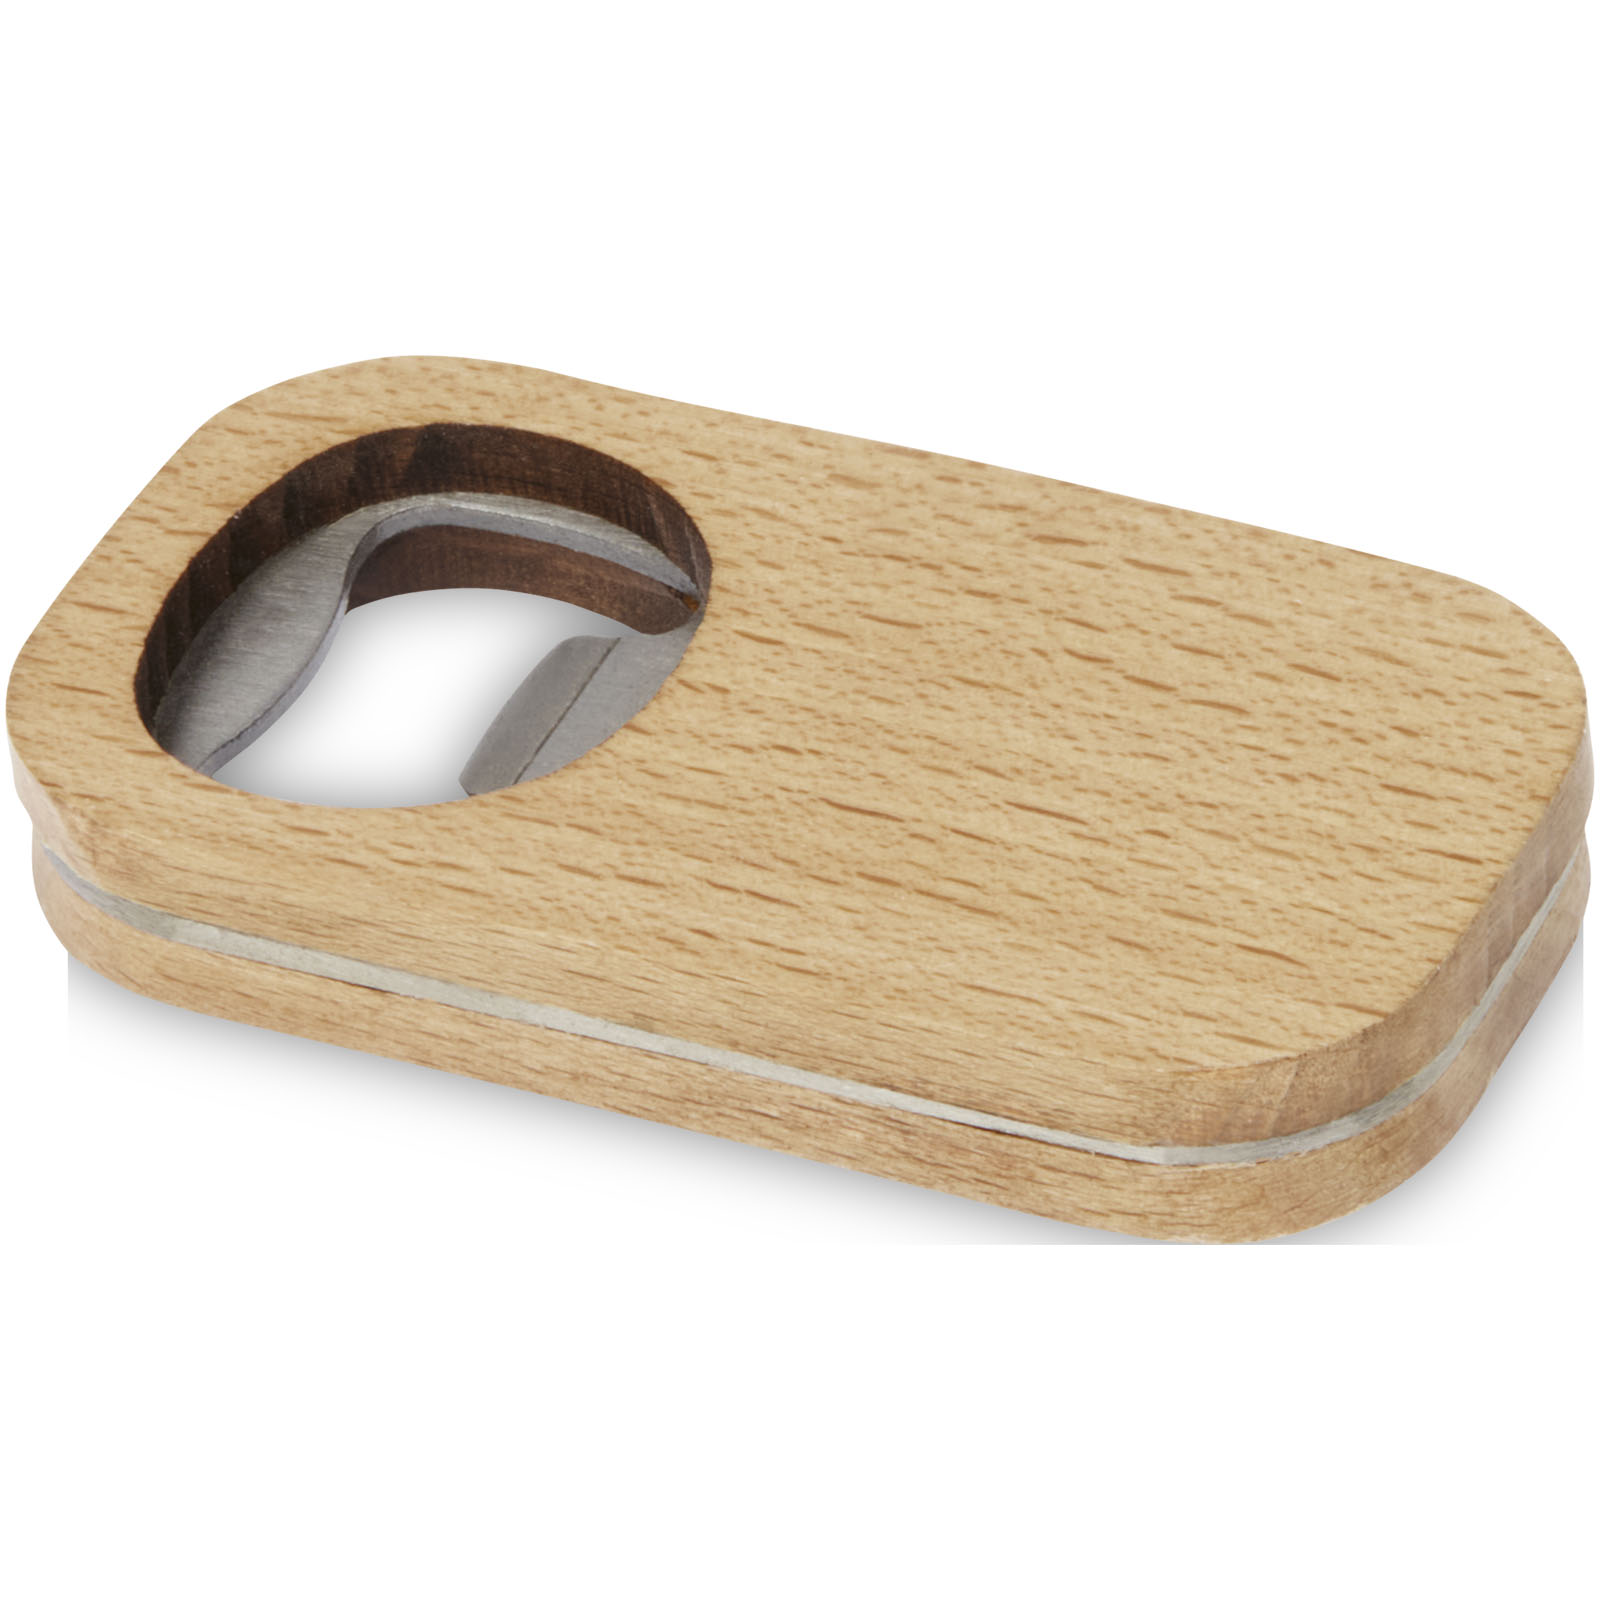 Bottle opener with a wooden surface made of stainless steel - Barkby